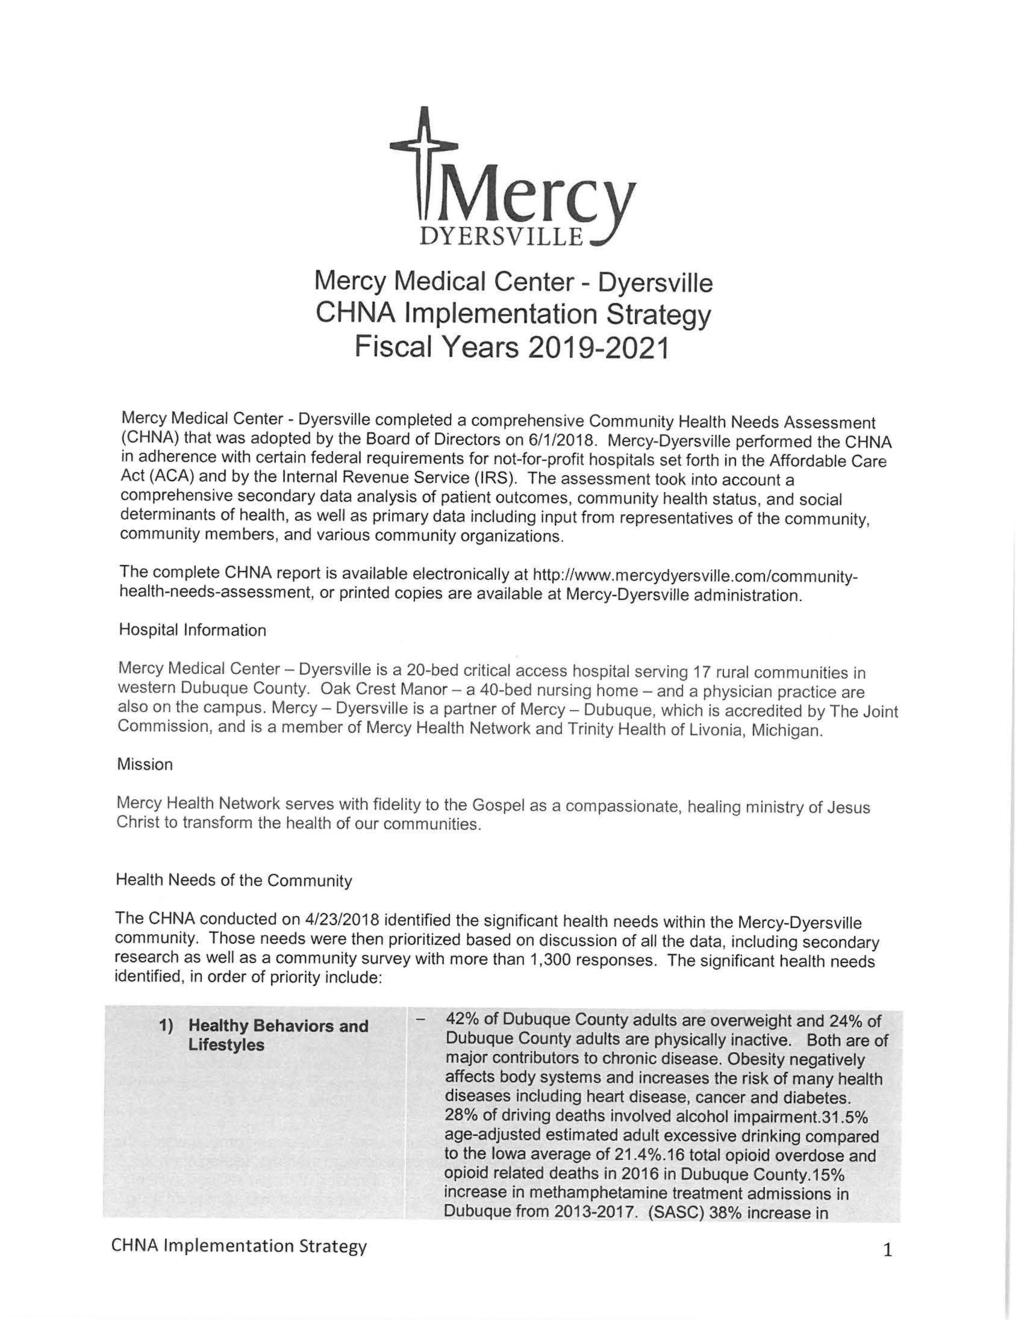 Mercy Medical Center - Dyersville CHNA Implementation Strategy Fiscal Years 2019-2021 Mercy Medical Center - Dyersville completed a comprehensive Community Health Needs Assessment (CHNA) that was